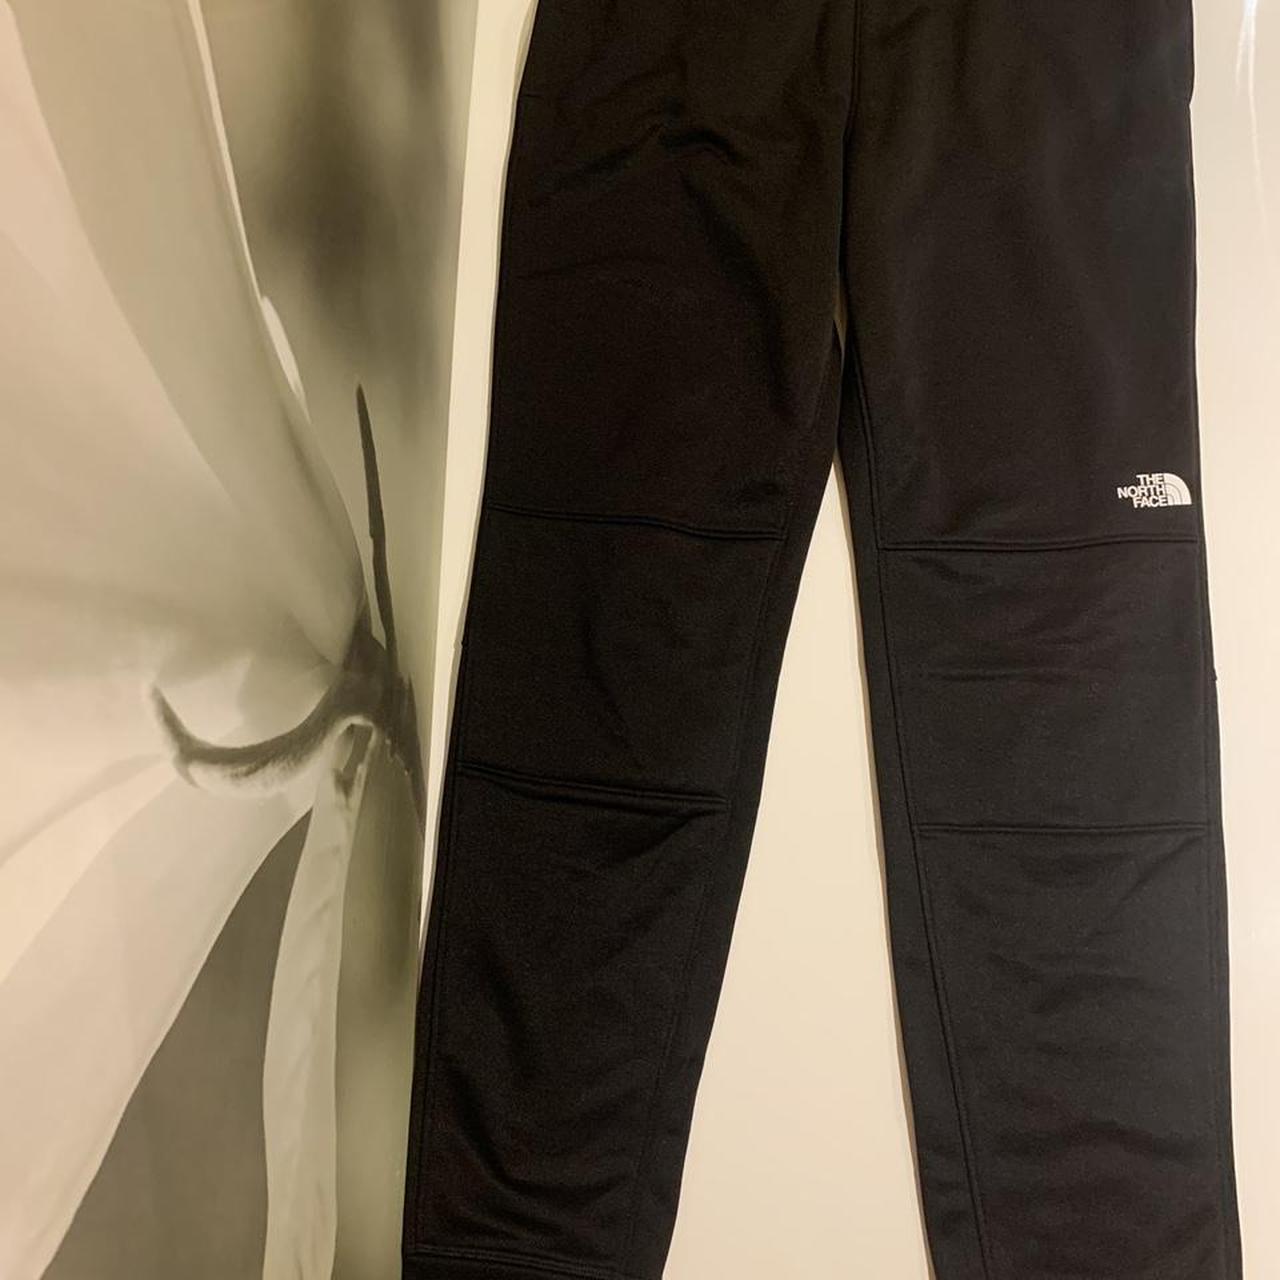 North Face Tracksuit Bottoms/Joggers - Brand New... - Depop